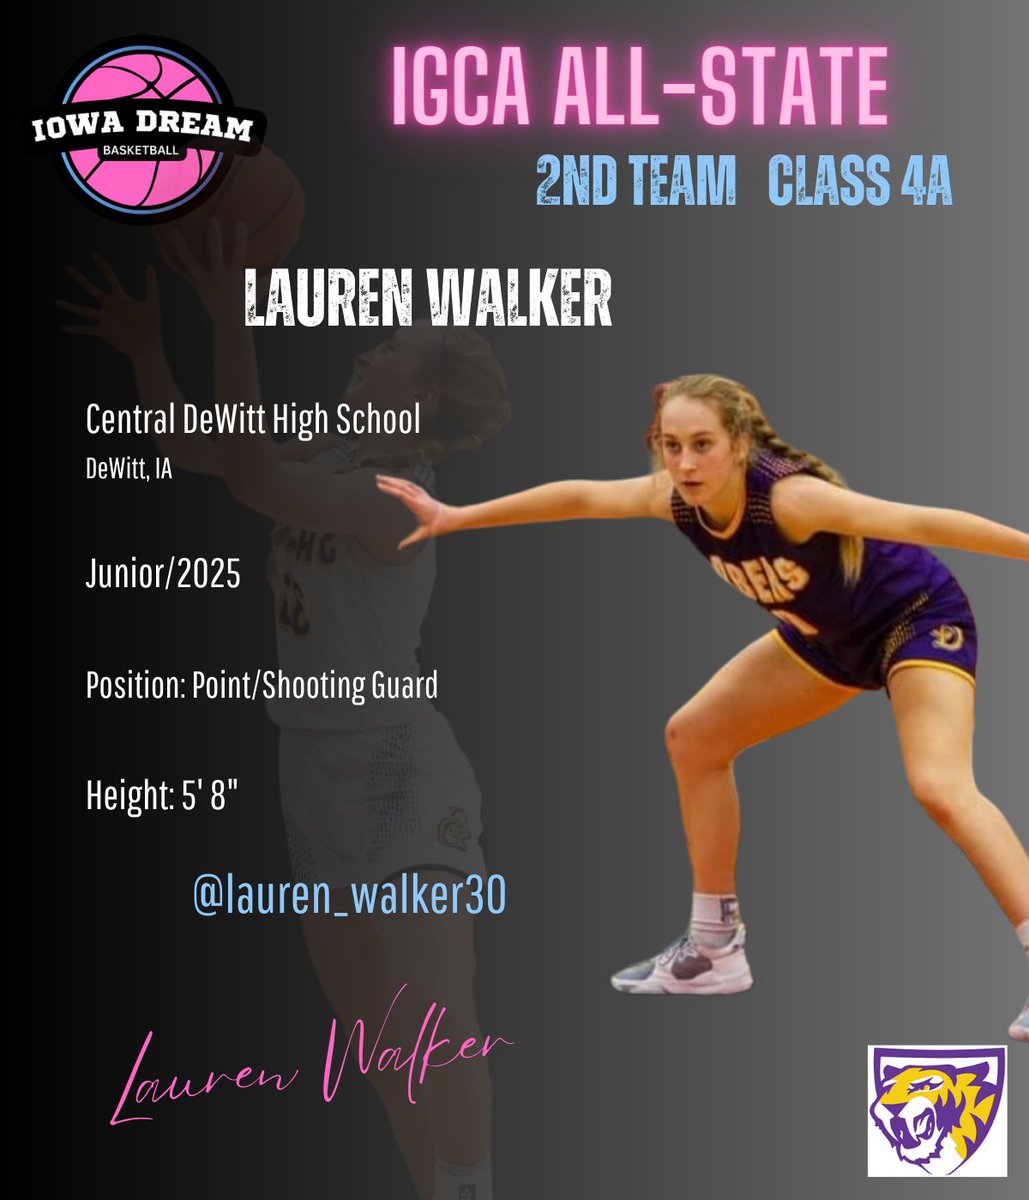 Congrats to junior Lauren Walker on earning IGCA 2nd Team All-State!